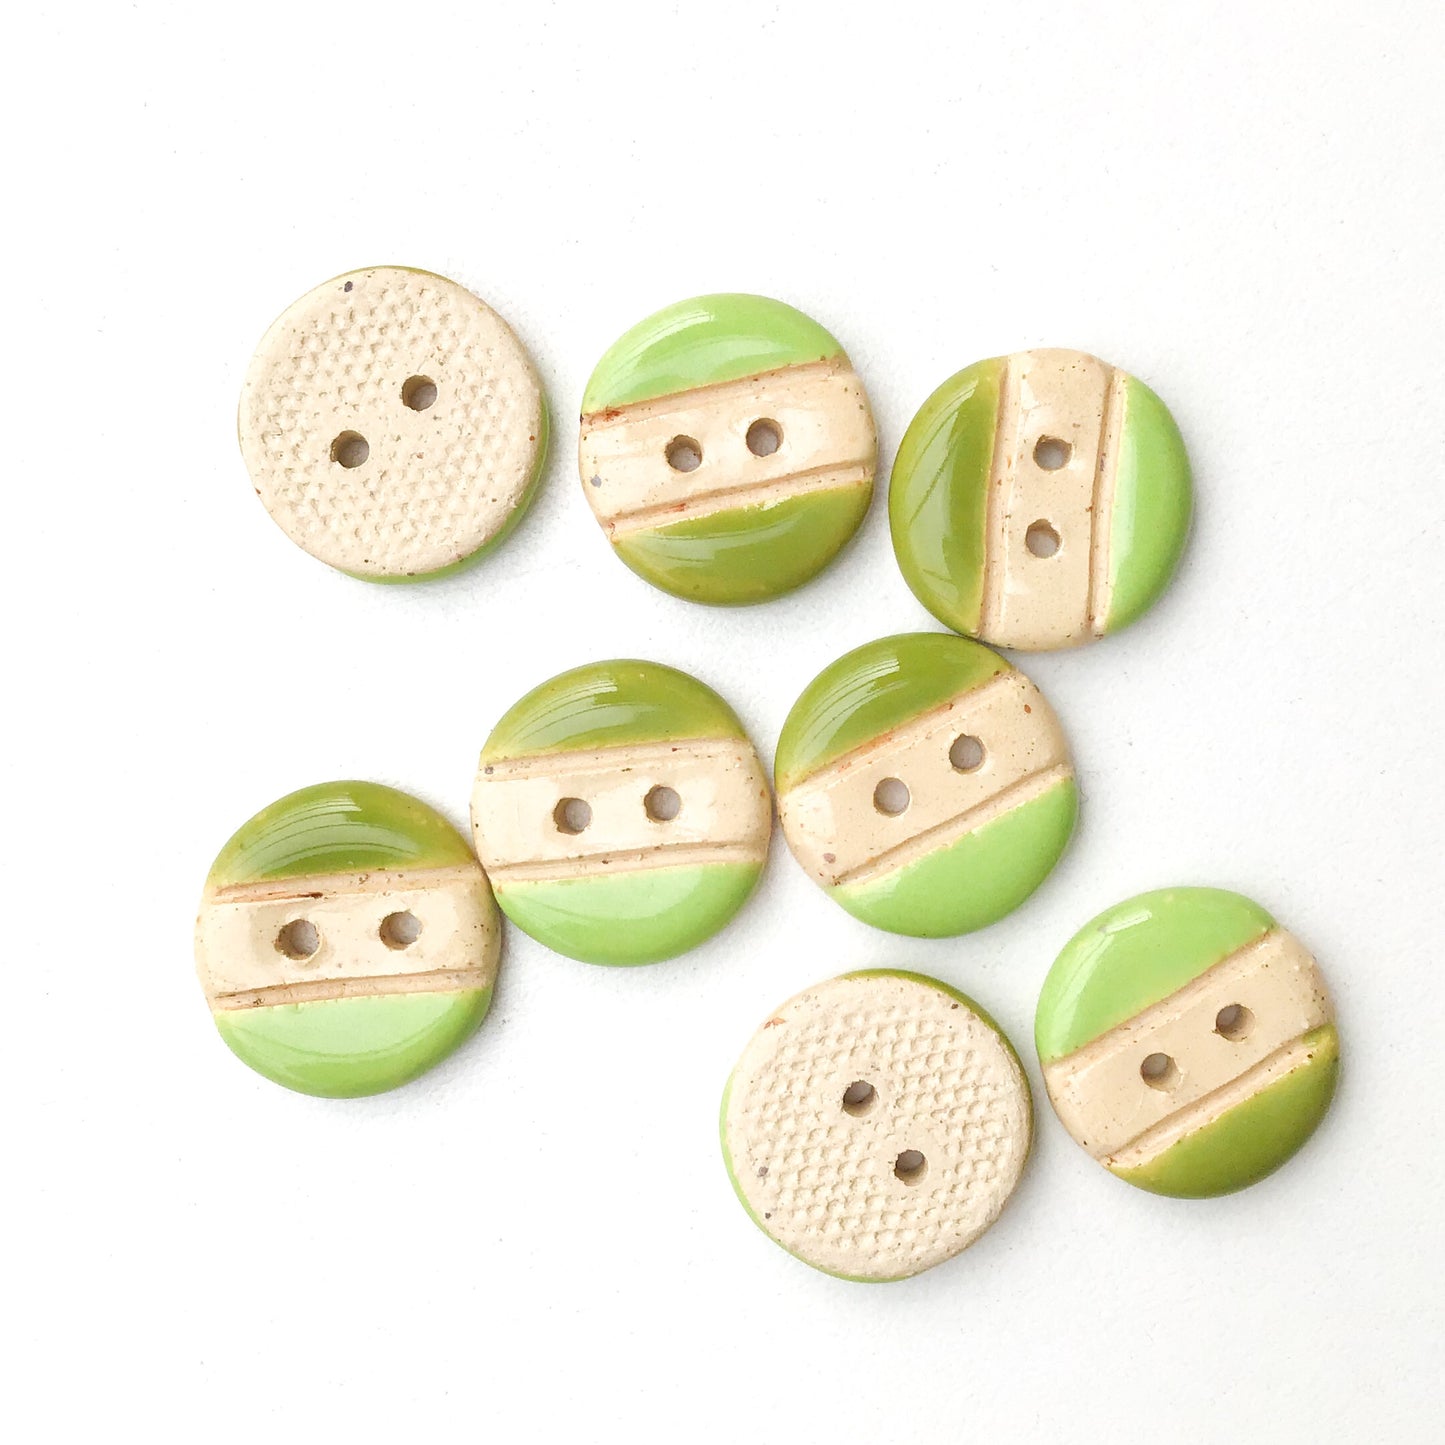 Olive & Lime Green Ceramic Buttons on Buff Clay - Round Ceramic Buttons - 11/16" - 8 Pack (ws-134)